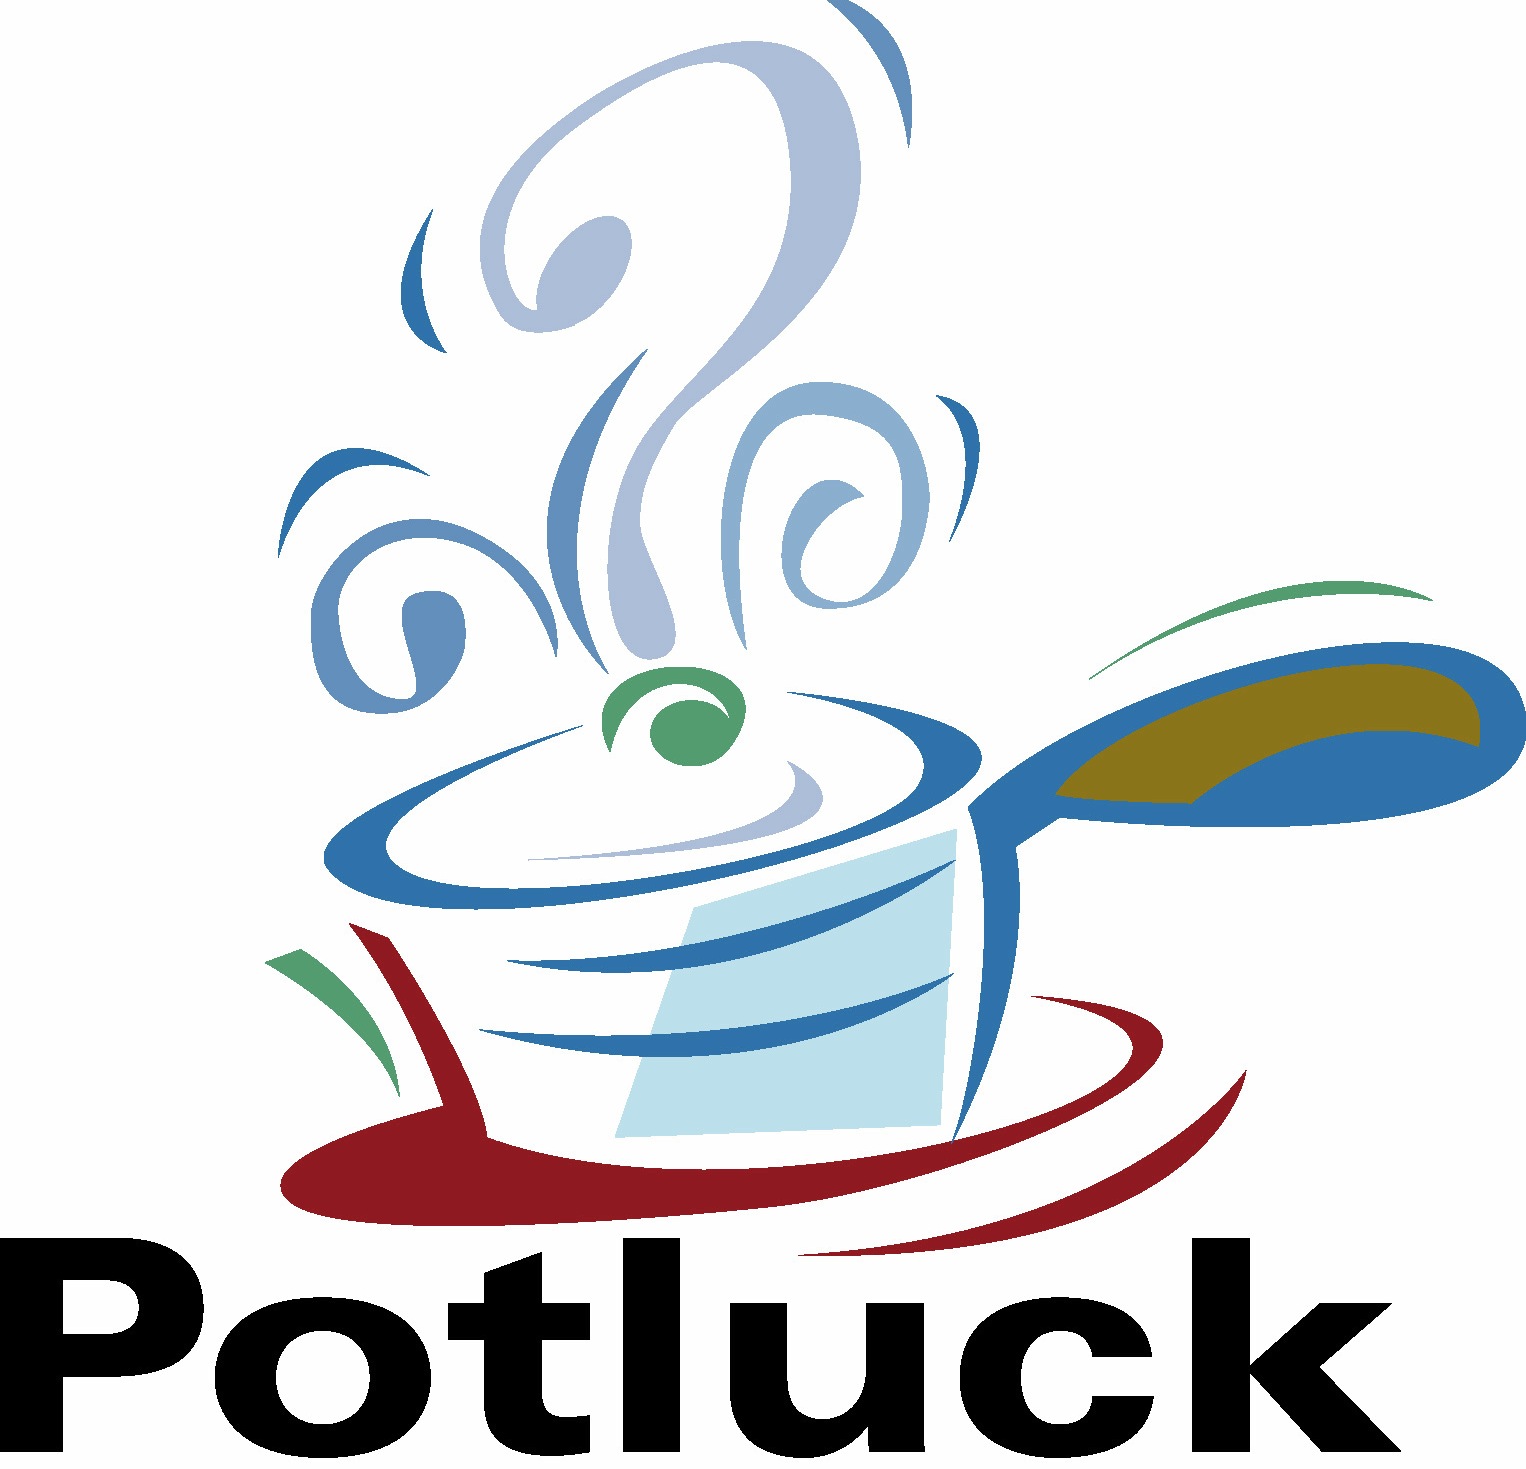 Displaying 19 Images For Potluck Images